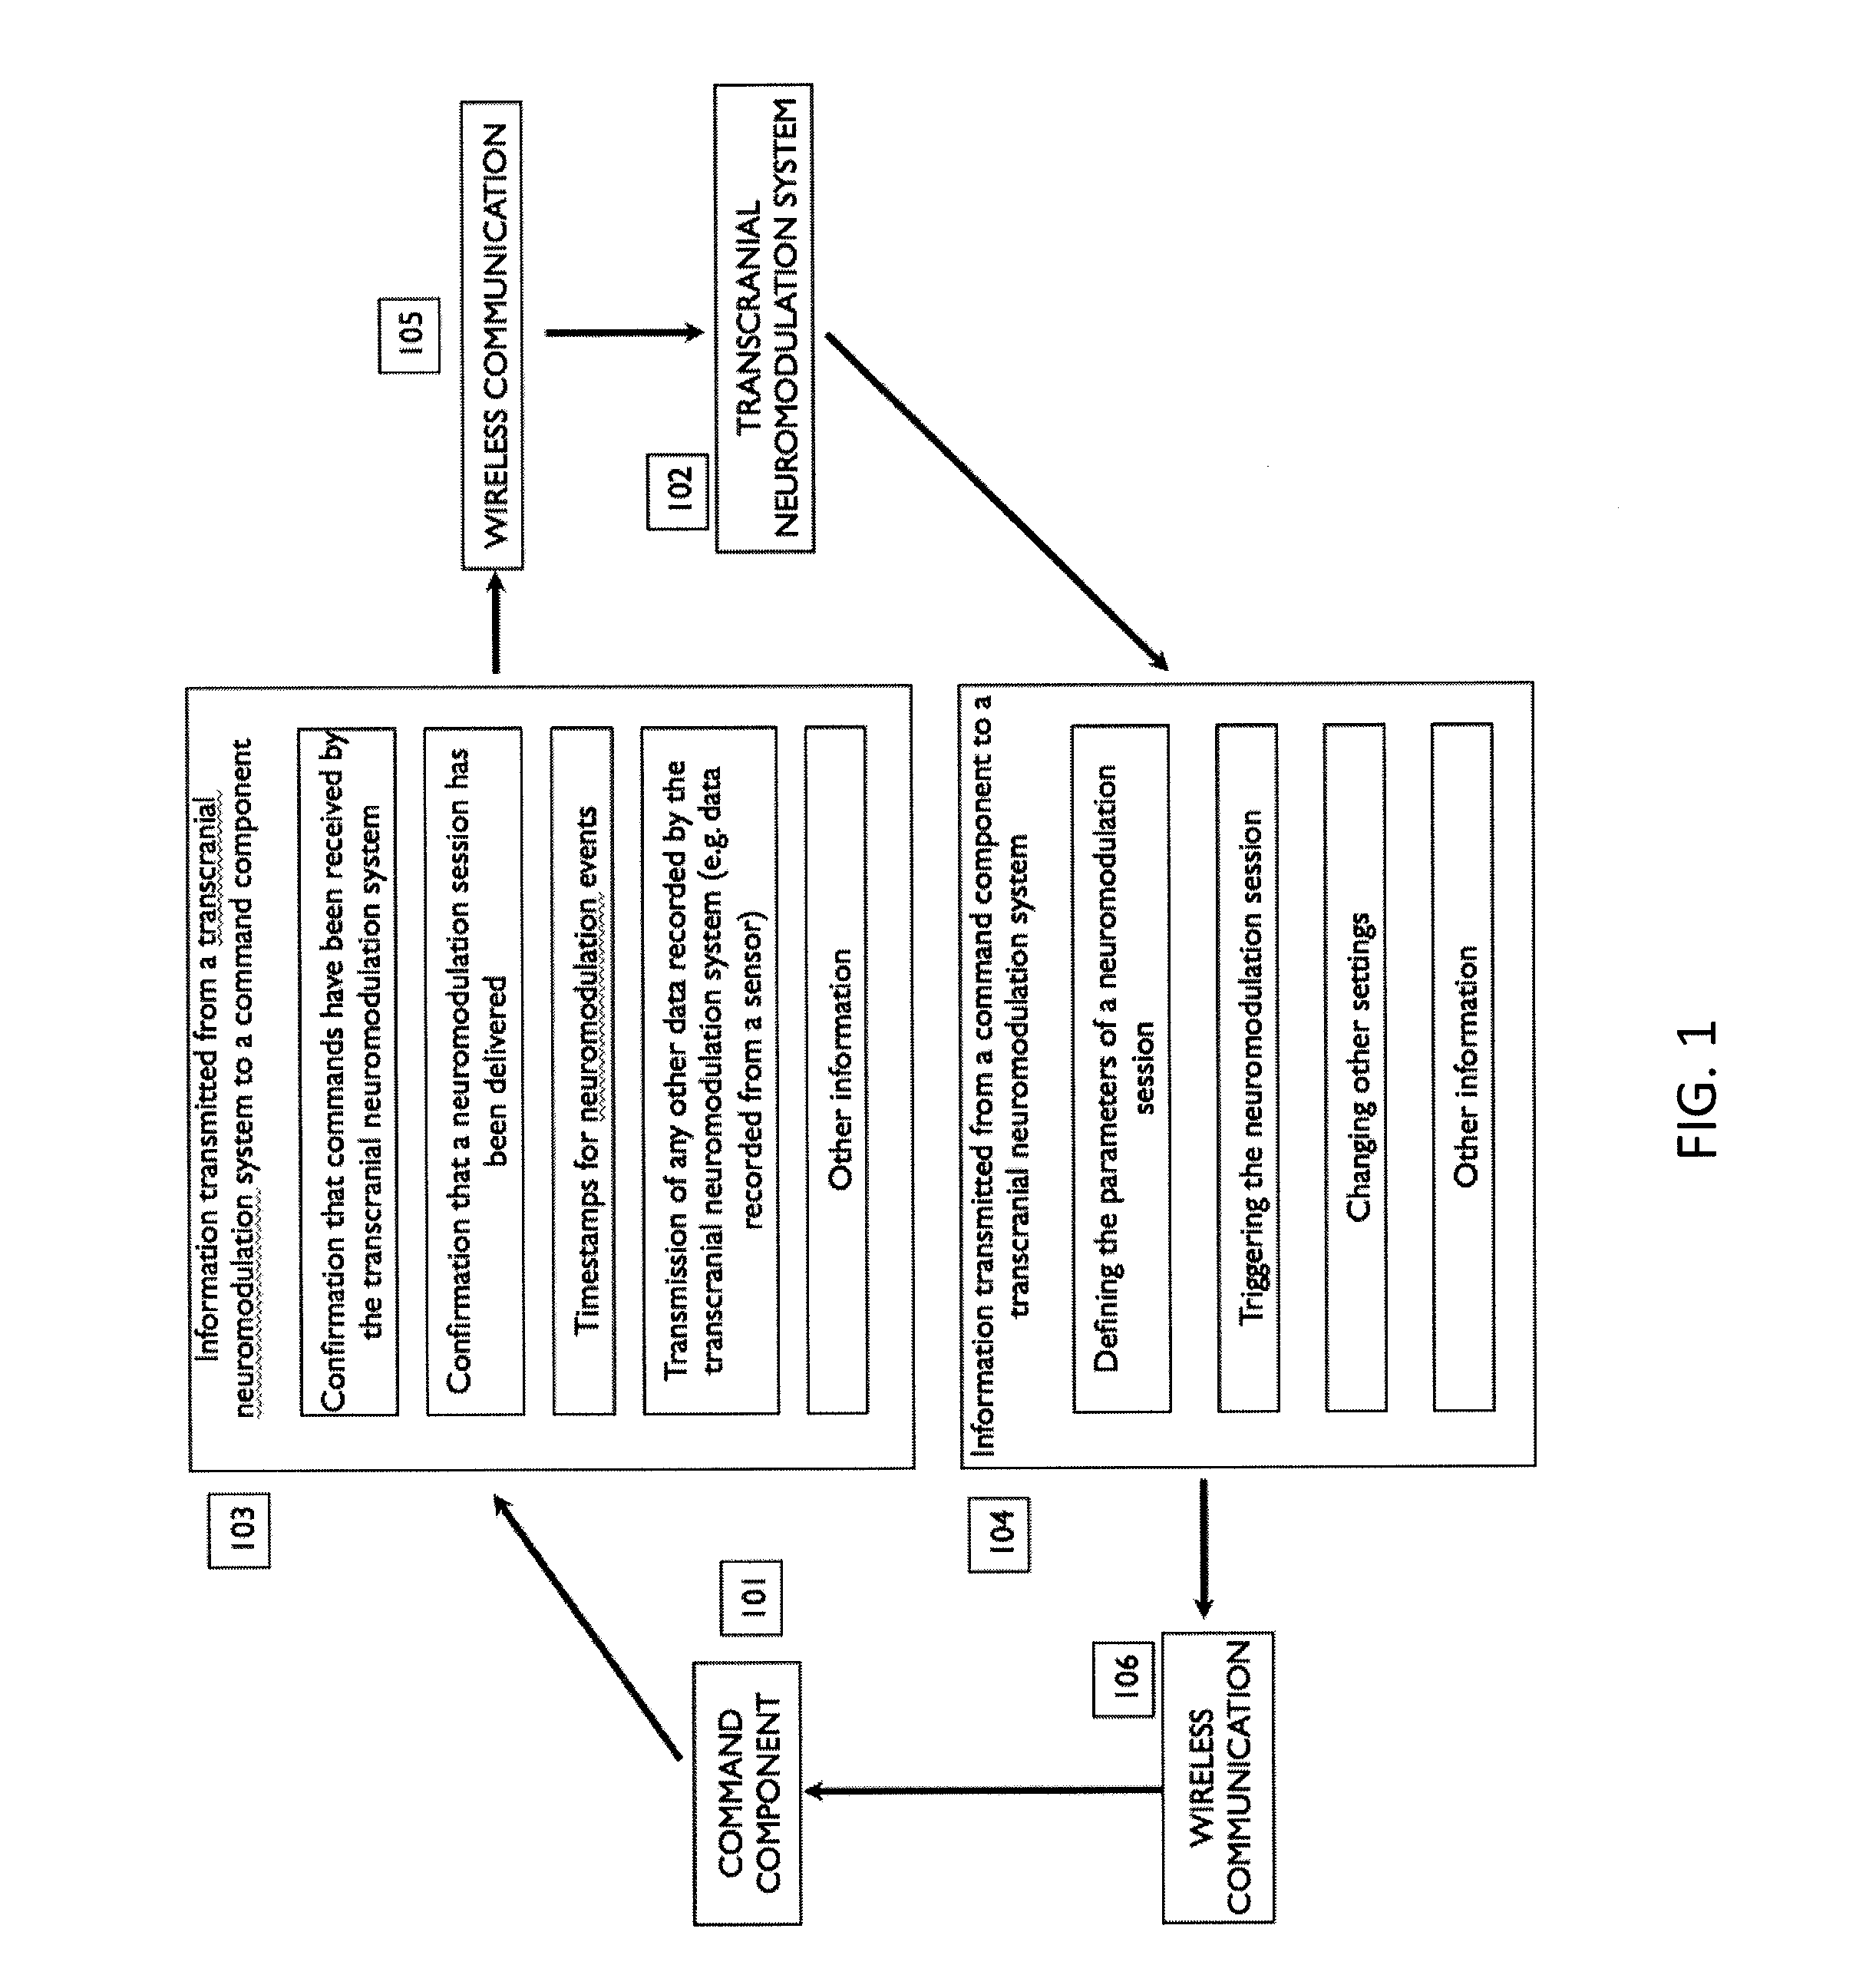 Methods and apparatuses for networking neuromodulation of a group of individuals